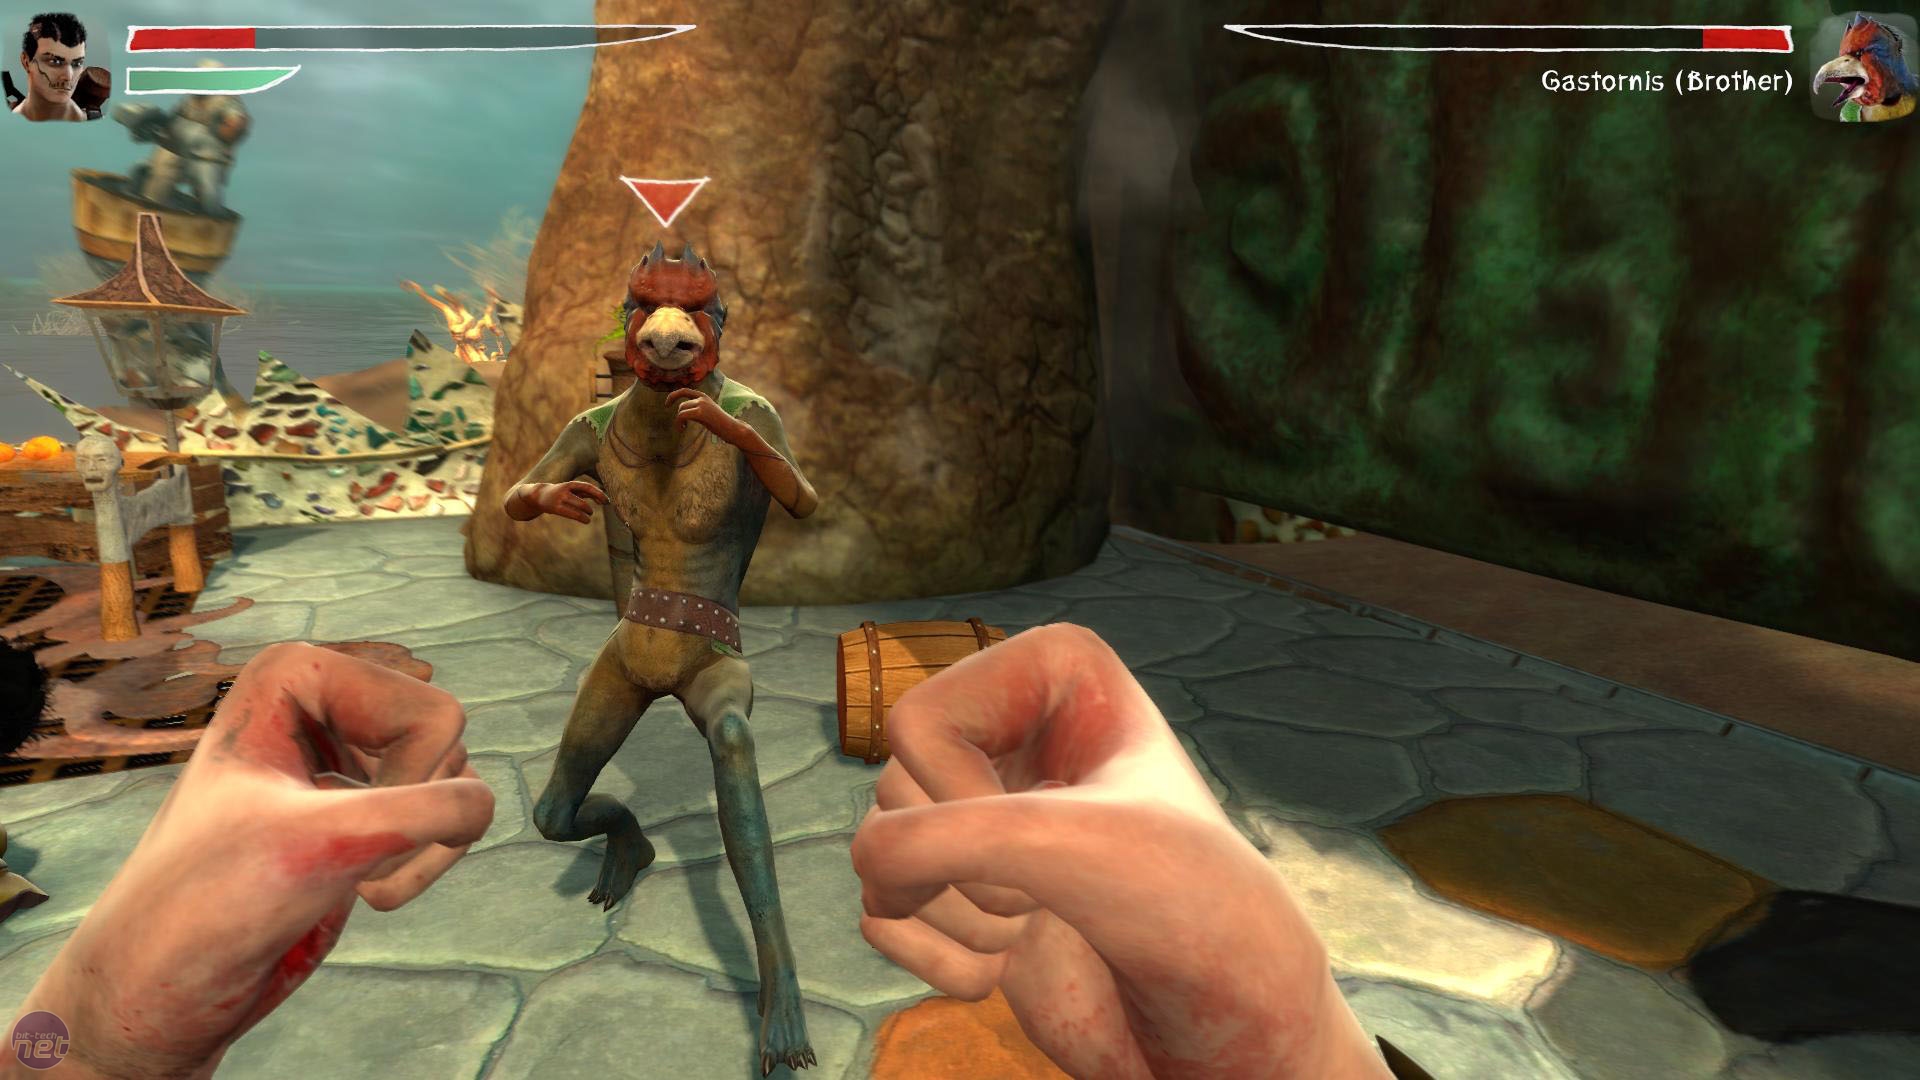 Two human fists are in the foreground, poised ready to attack. A reptilian figure, also ready to attack, is behind them facing the camera.